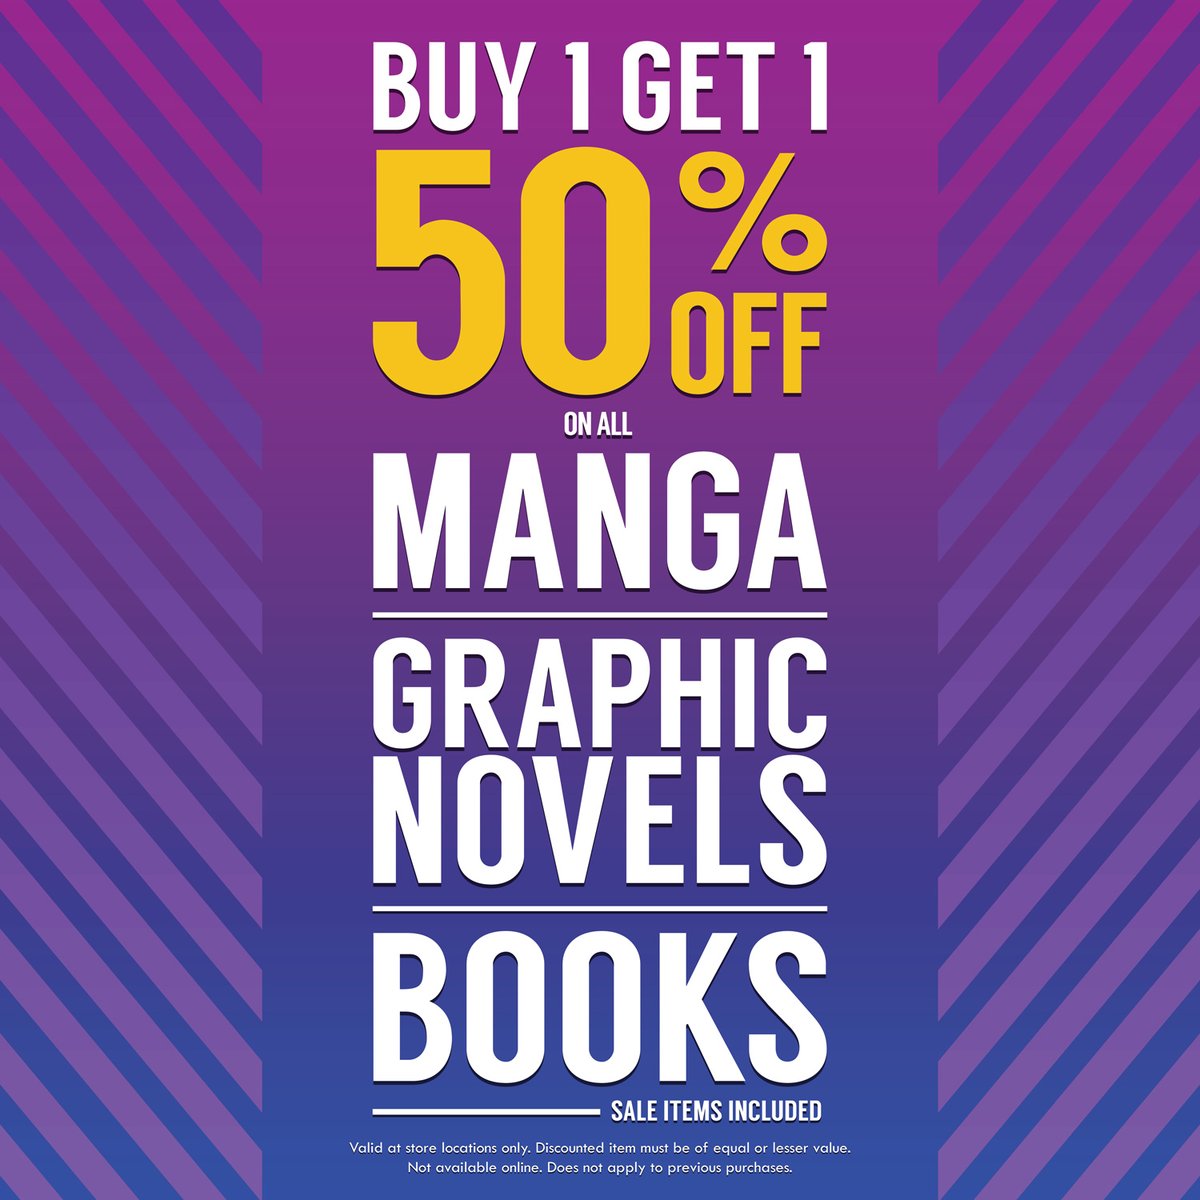 Pick up the latest and greatest books at Newbury Comics - All Books, Manga, and Graphic Novels are Buy 1 Get 1 50% off  📚 offer valid in stores only through 5/19.

#newburycomics #books #manga #graphicnovels #b1g1 #deals #dragonball #loreolympus #hplovecraft #criticalrole